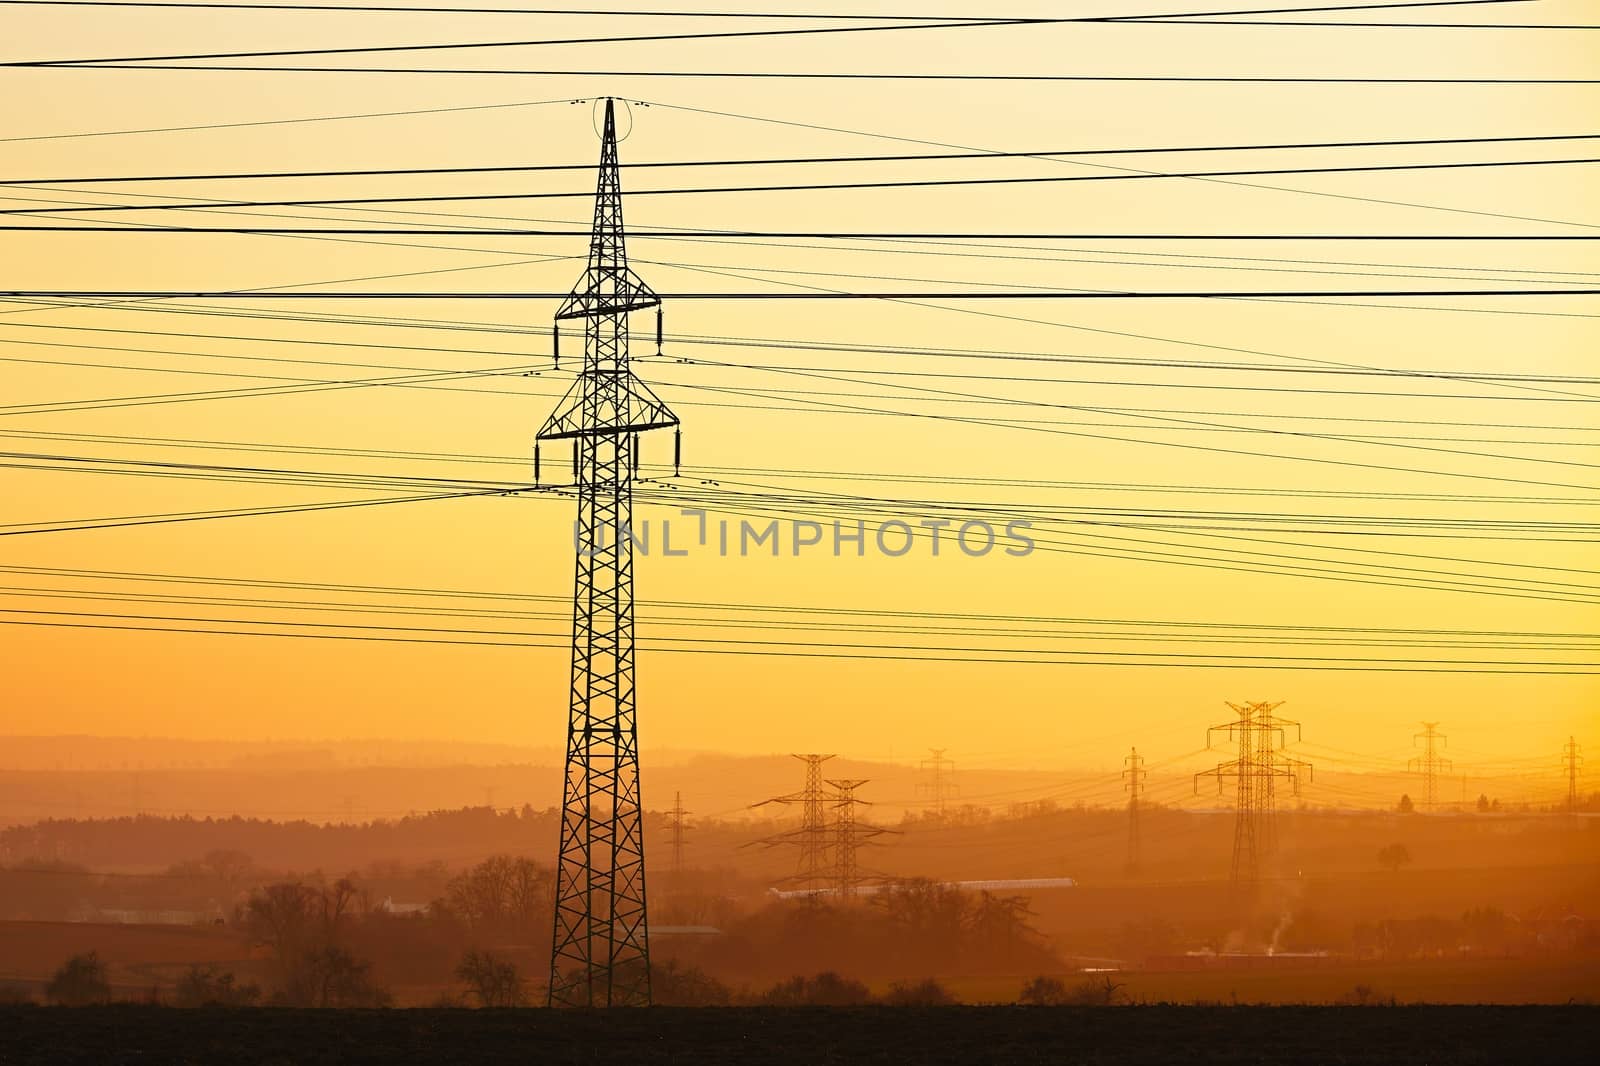 Silhouette electricity pylons during sunset - Czech Republic